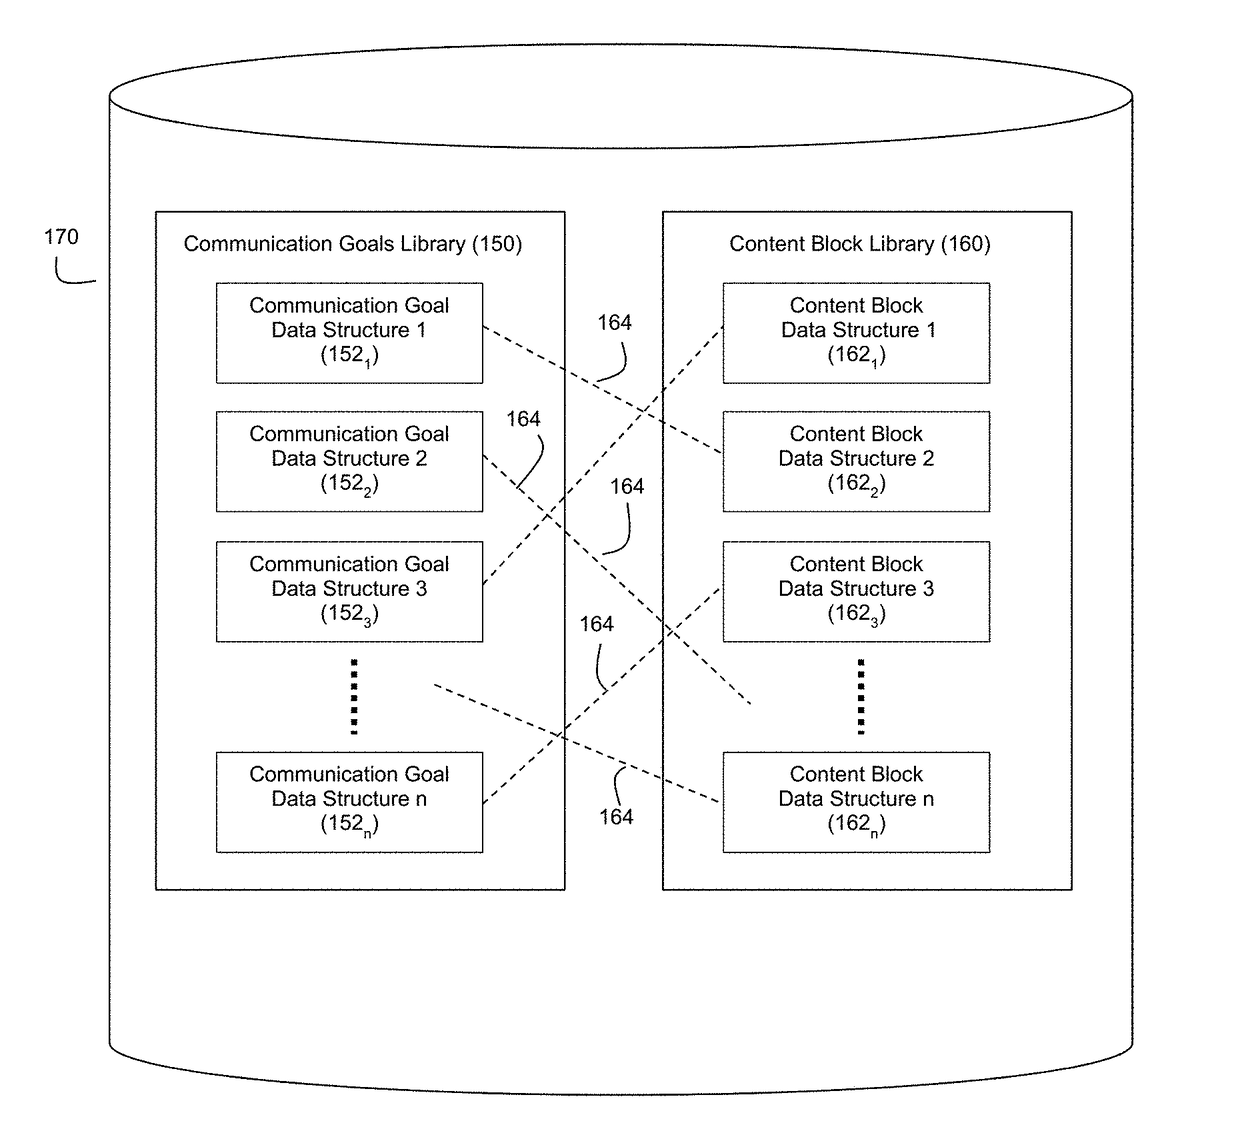 Automatic generation of narratives from data using communication goals and narrative analytics